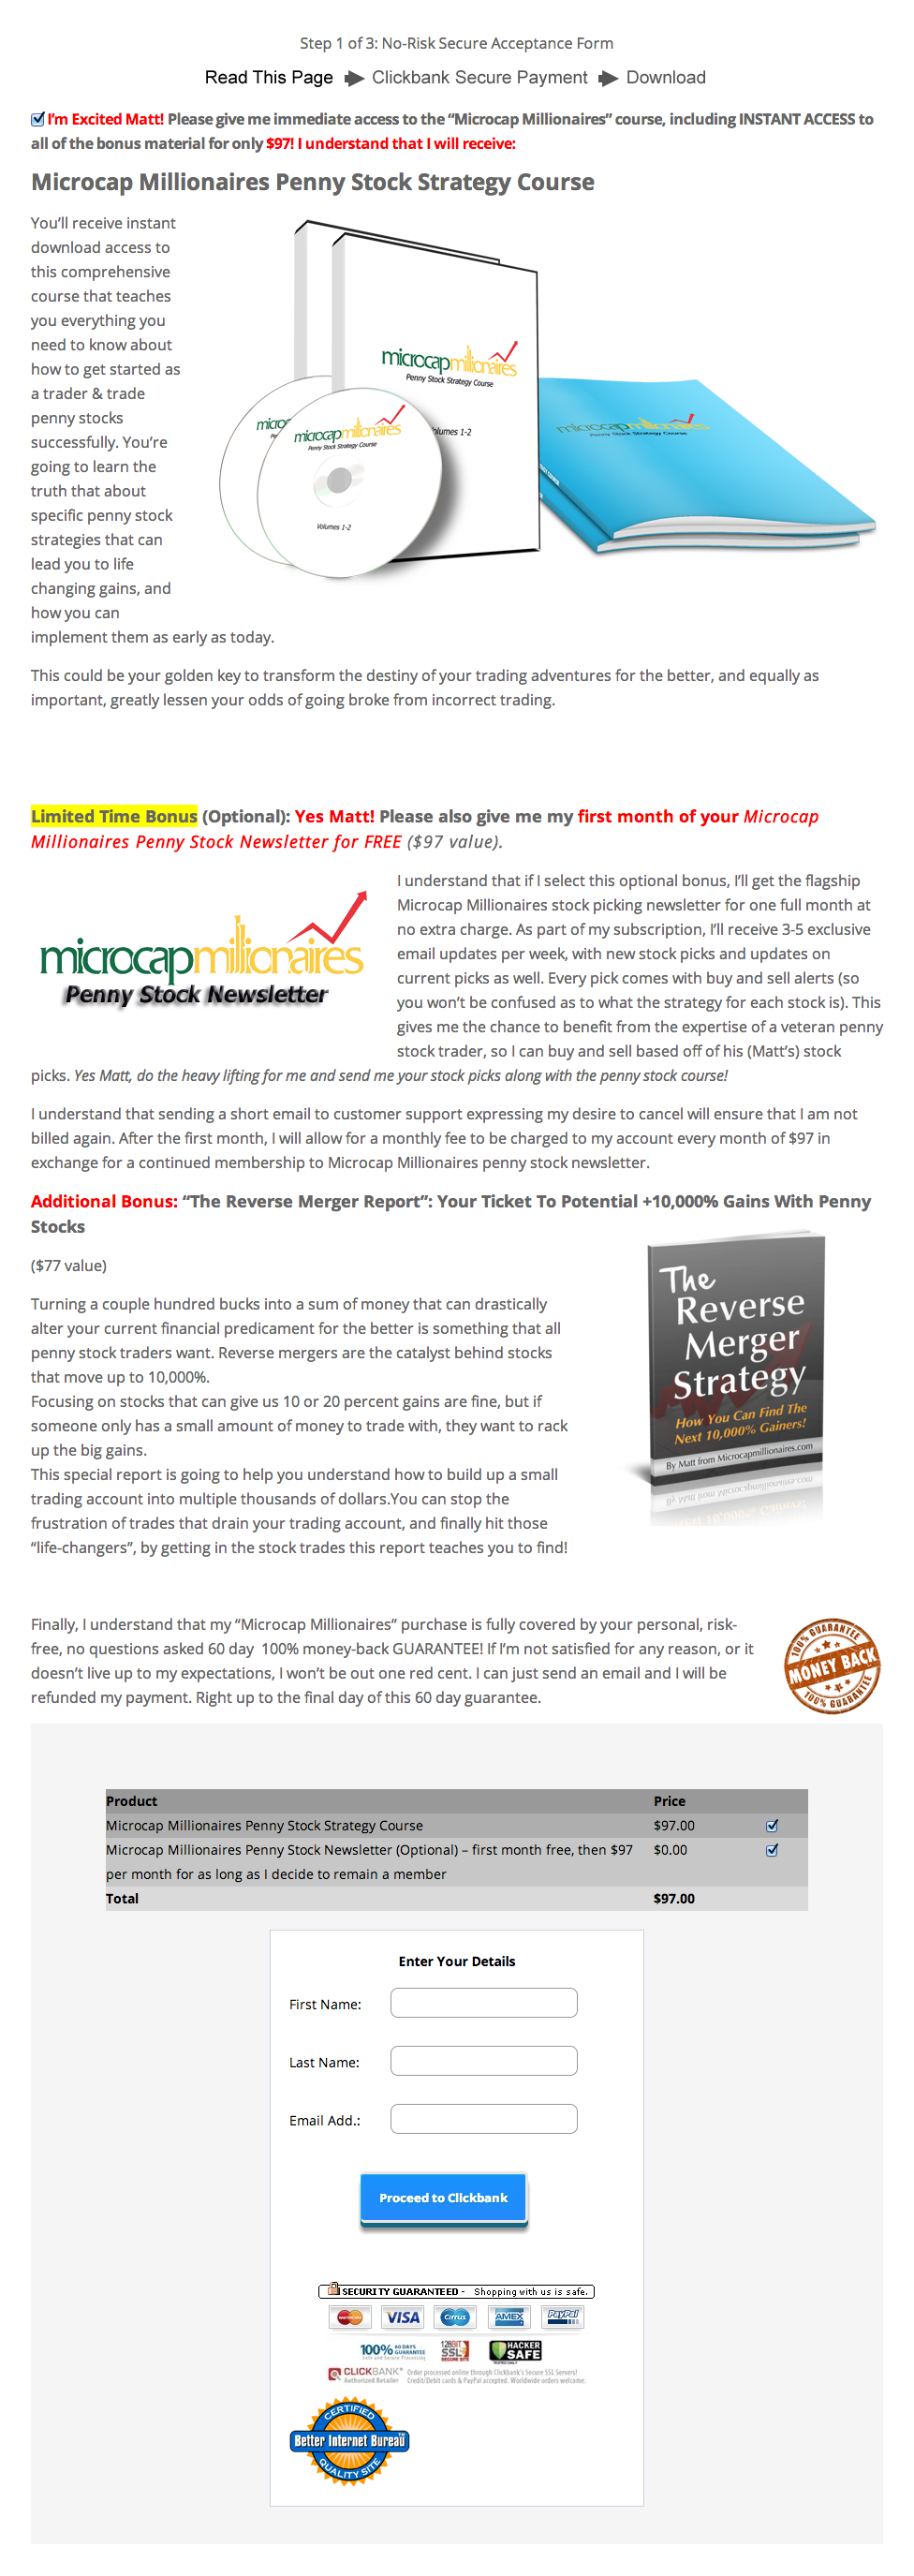 Step 1 For Penny Stock Strategy & Newsletter Checkout